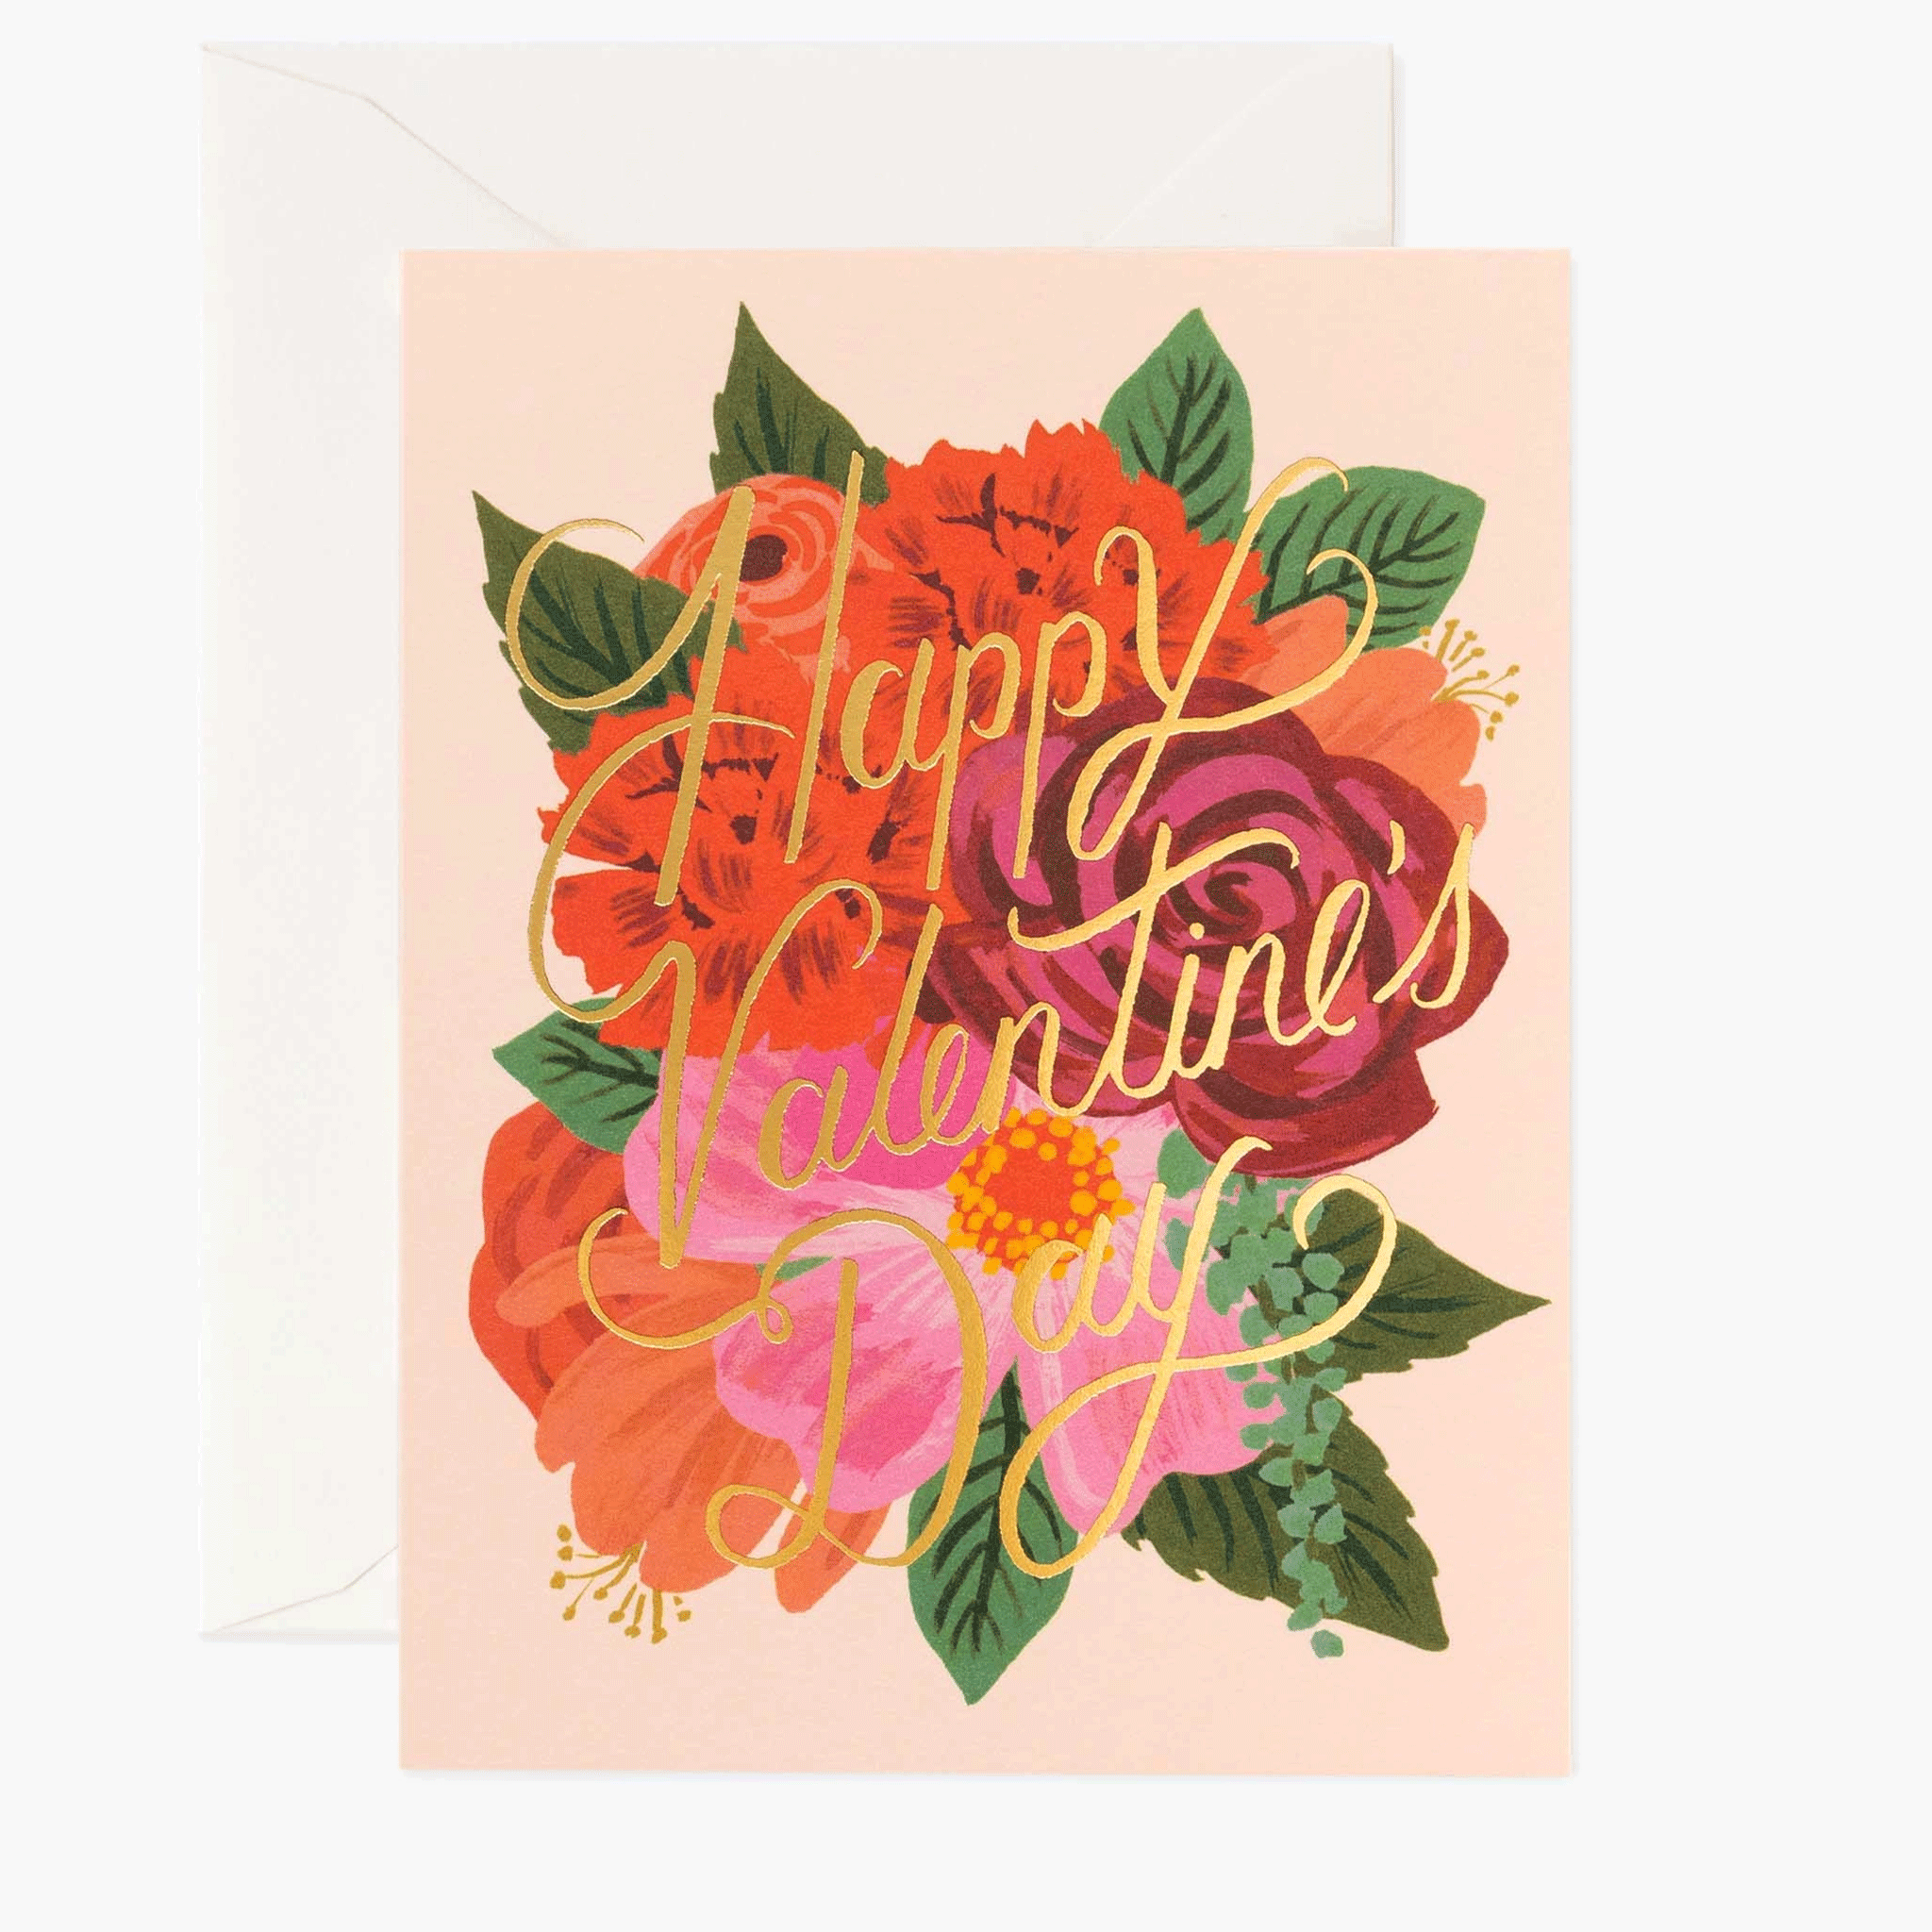 On a white background is a light pink card with a red and pink illustration of a flower bouquet and gold text that reads, "Happy Valentine's Day". 